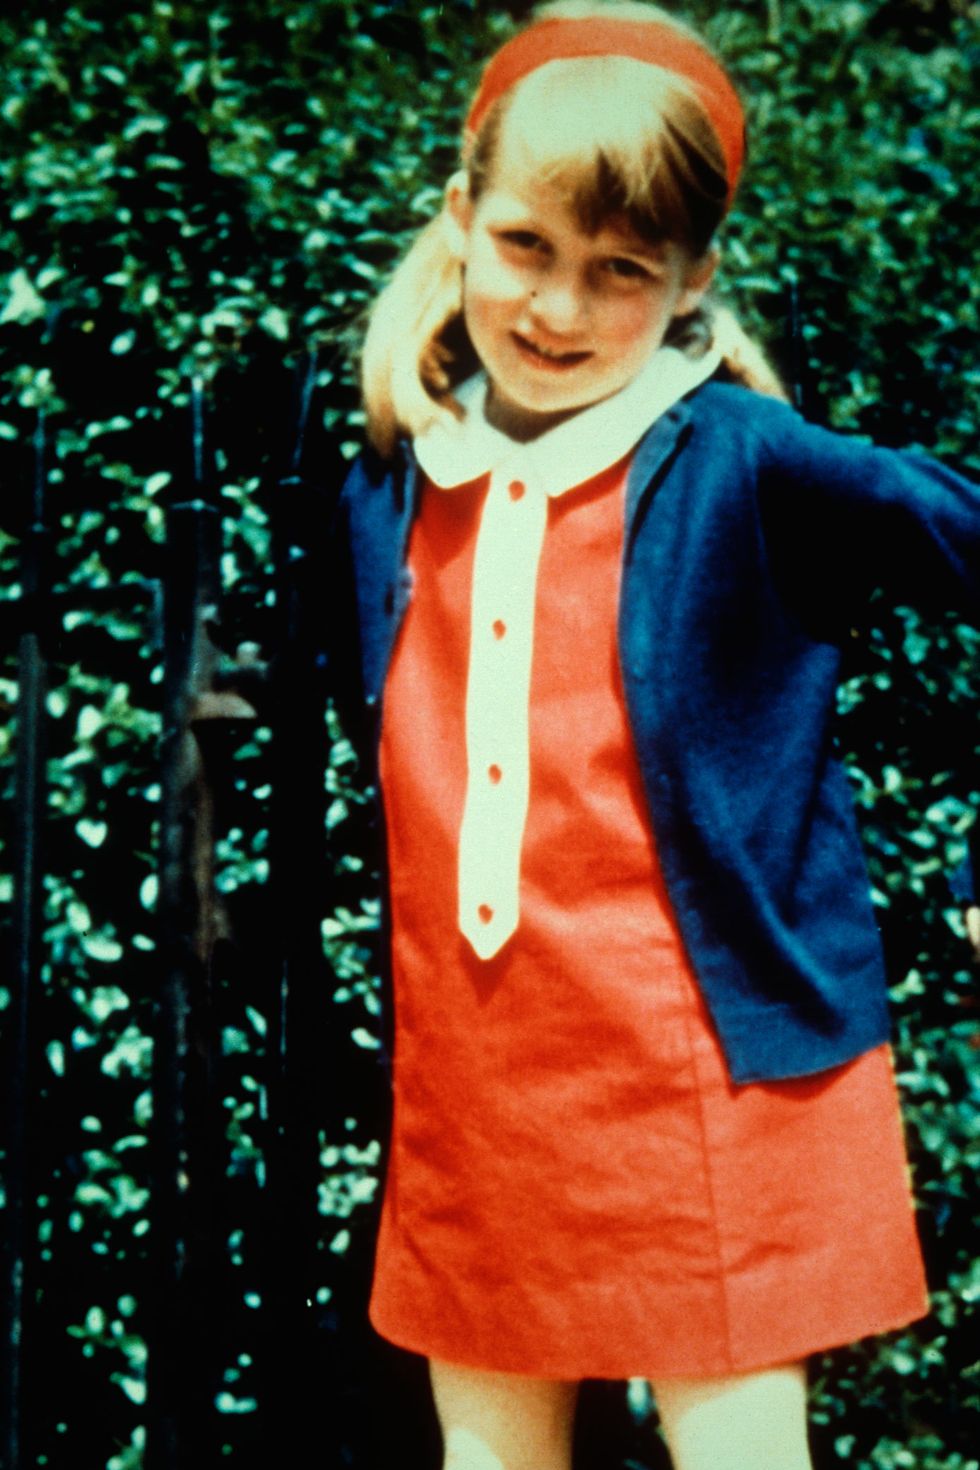 <p>At one point, Diana attended the West Heath School in Kent, England. When she was 16, she <a href="http://www.goodhousekeeping.com/life/entertainment/g2812/princess-diana-facts/" target="_blank" data-tracking-id="recirc-text-link">failed two exams</a>. By today's standards, this doesn't seem that terrible, but her father wanted to&nbsp;enroll&nbsp;her in a Swedish boarding when he heard; she&nbsp;insisted on&nbsp;returning home instead.&nbsp;</p><p><strong data-redactor-tag="strong" data-verified="redactor">RELATED: </strong><a href="http://www.redbookmag.com/life/g3667/diana-princess-of-wales/" target="_blank" data-tracking-id="recirc-text-link"><strong data-redactor-tag="strong" data-verified="redactor">20 Beautiful Photos of Princess Diana At Home</strong></a></p>